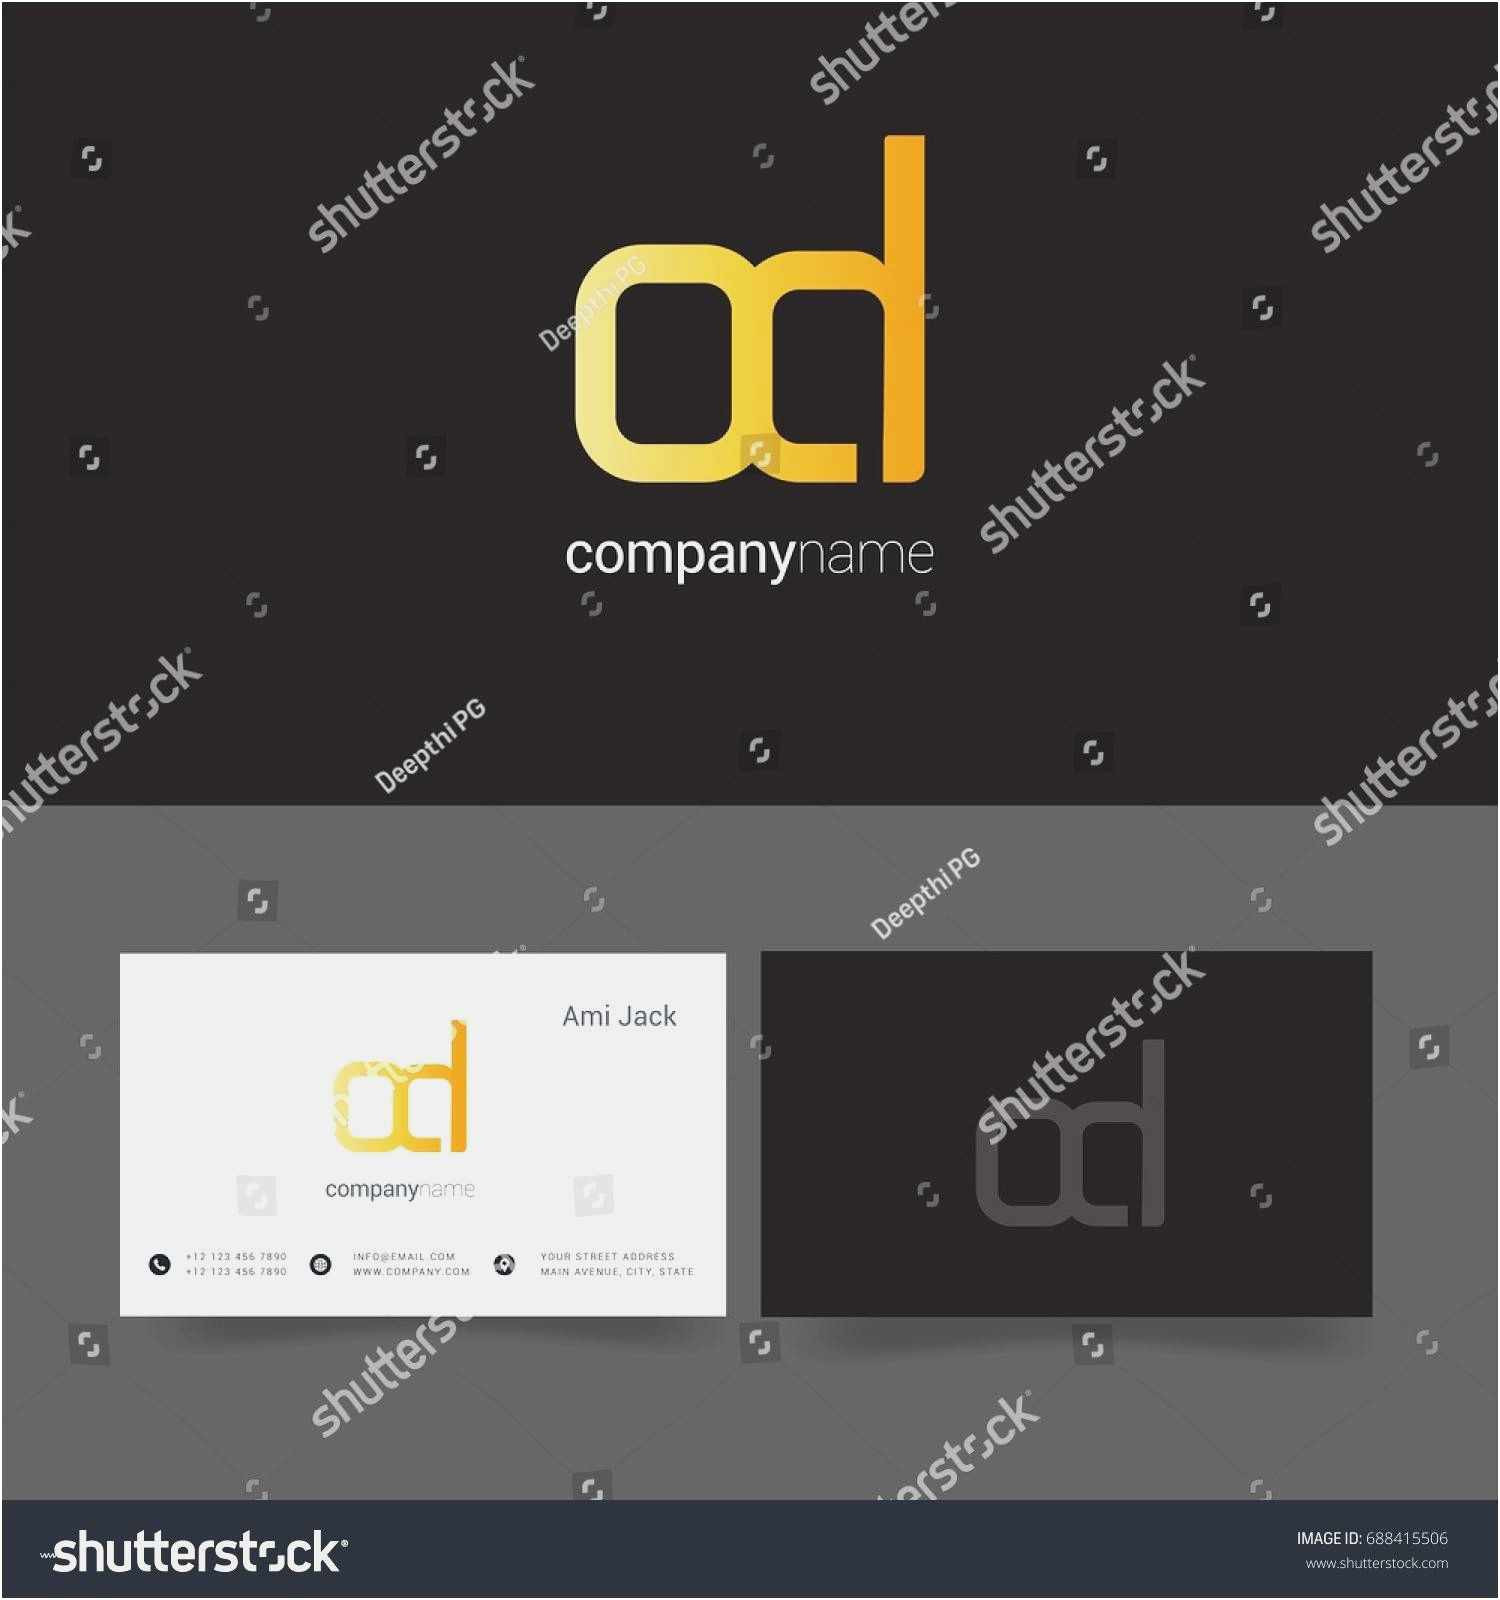 Free Designing Business Cards Business Card Sample Design Of Single Business Card Template